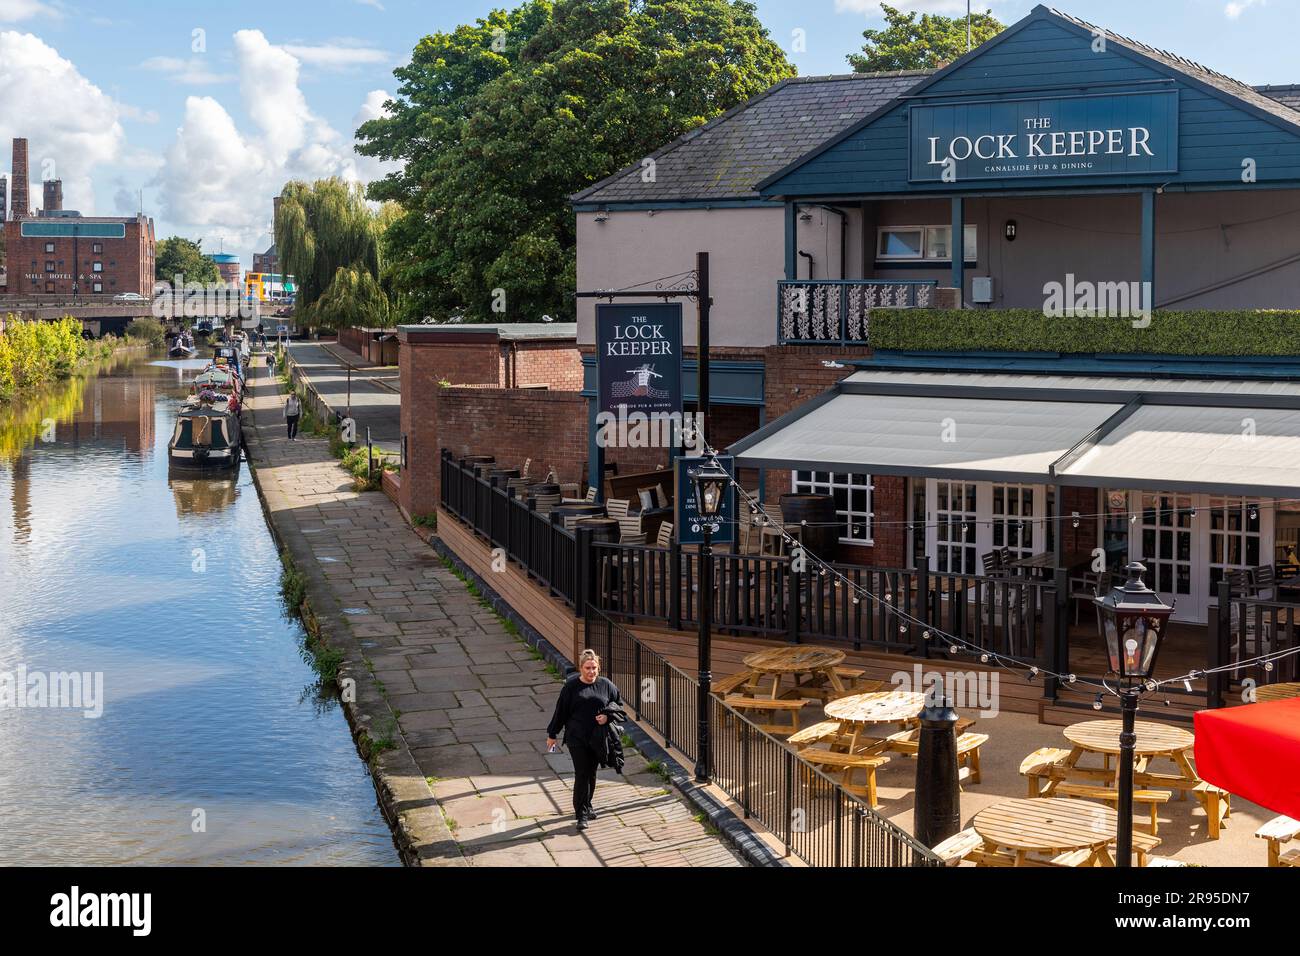 The Lockkeeper Canalside Pub on the banks of the Shropshire Union Canal in Chester, Cheshire, UK. Stock Photo